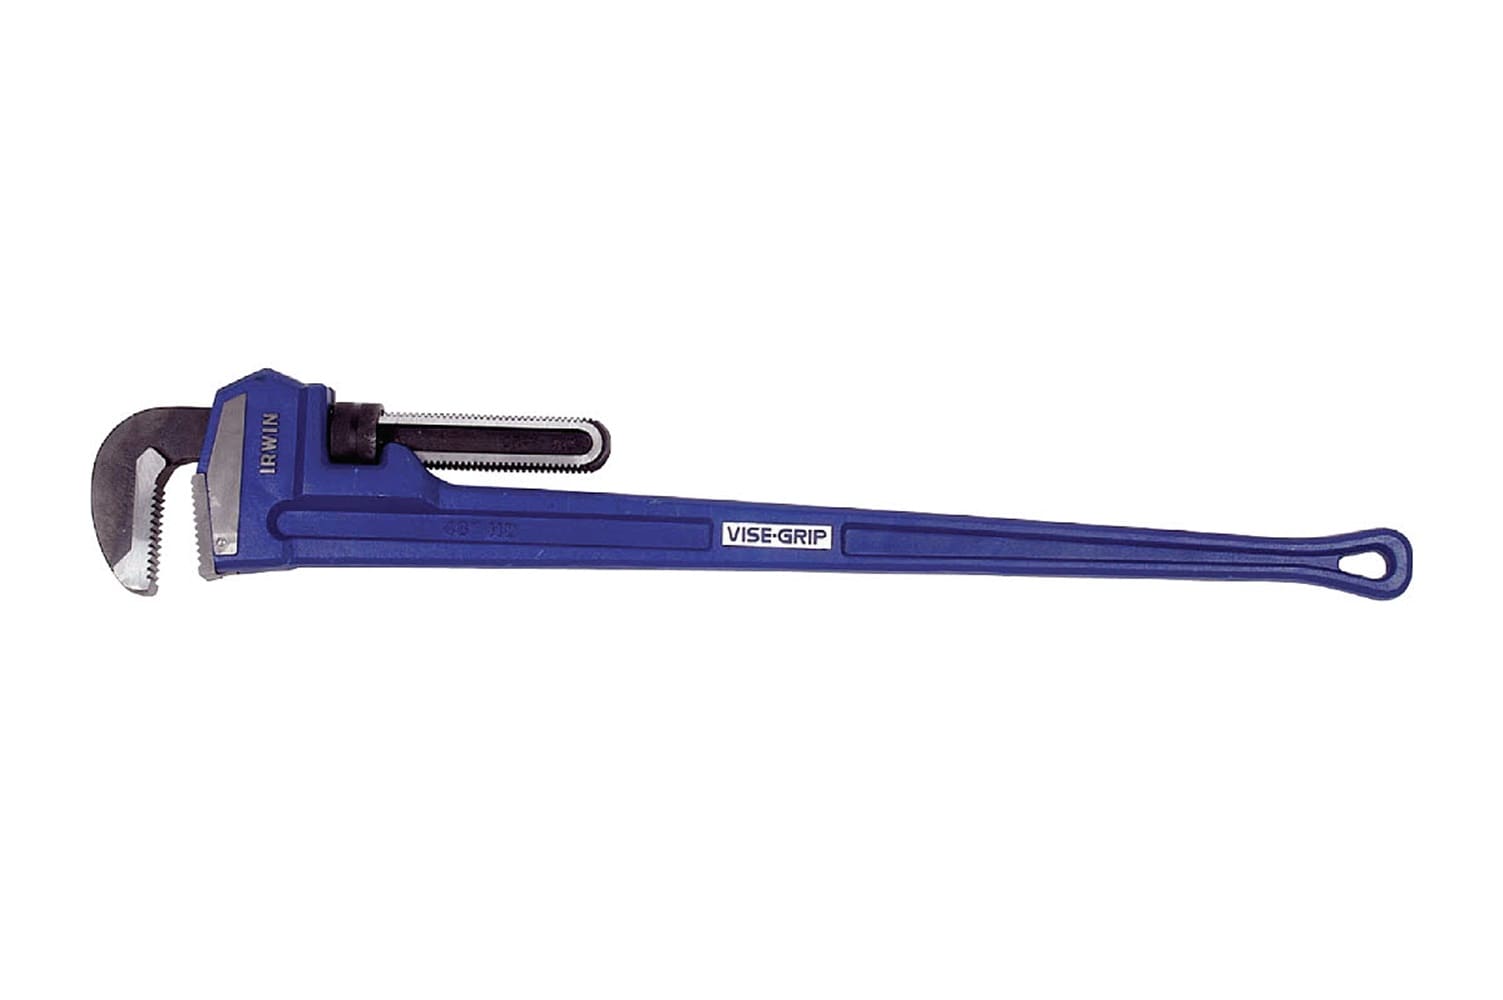 IRWIN 48" Cast Aluminum Pipe Wrench 2074148 for sale online